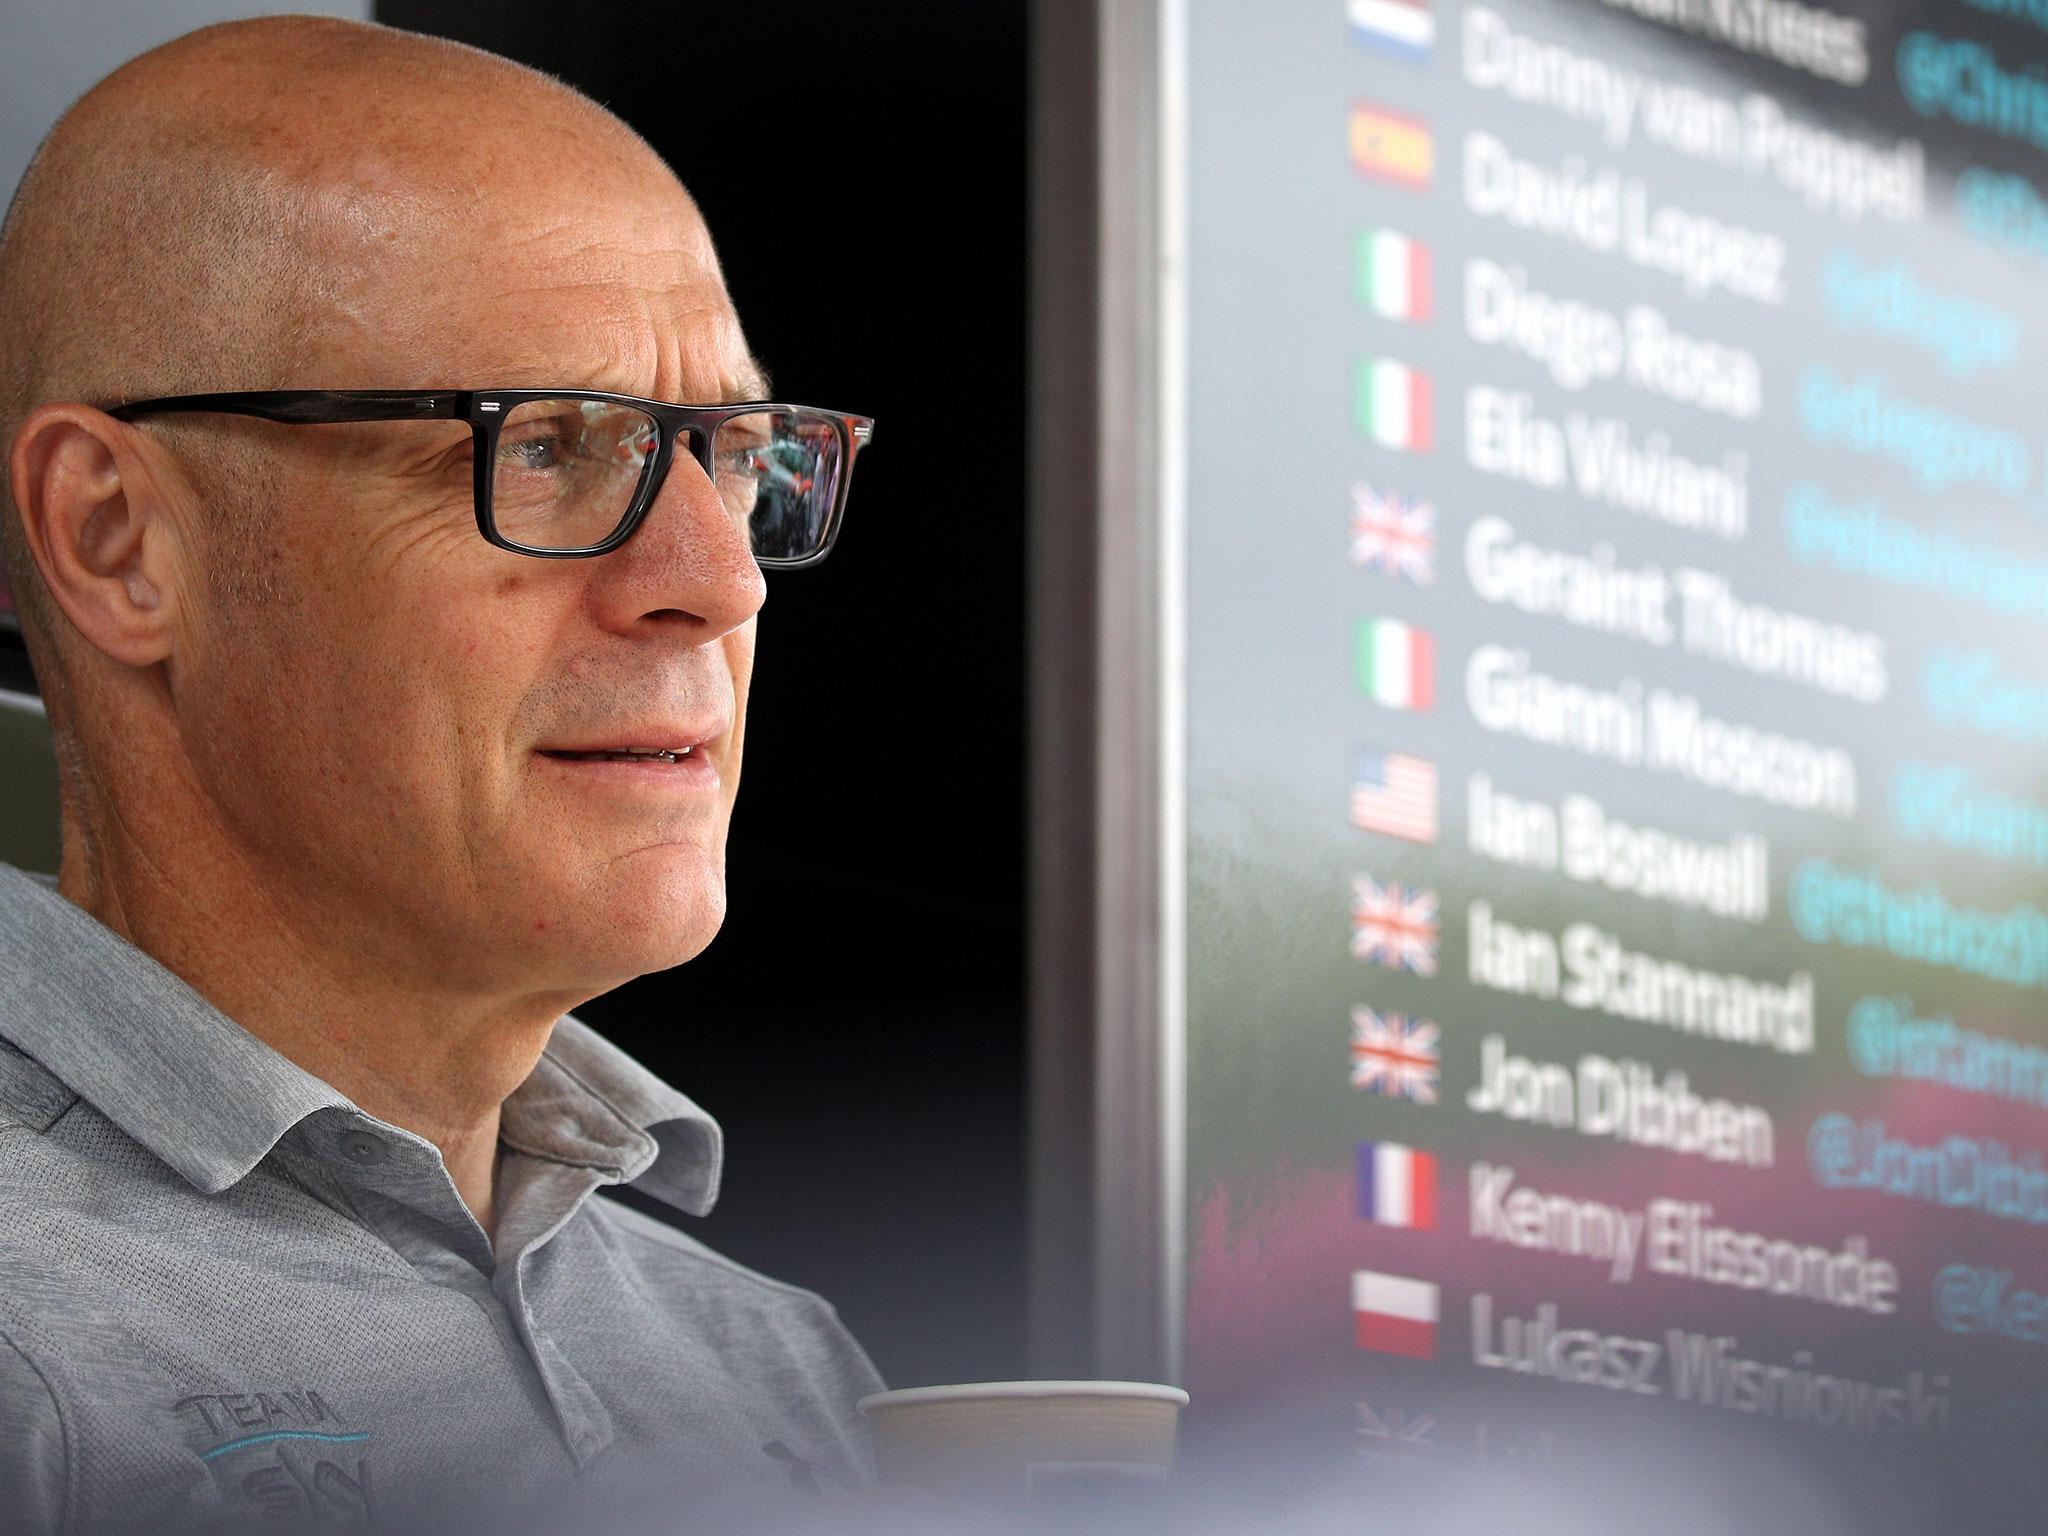 Dave Brailsford has clashed with sections of the media in recent weeks